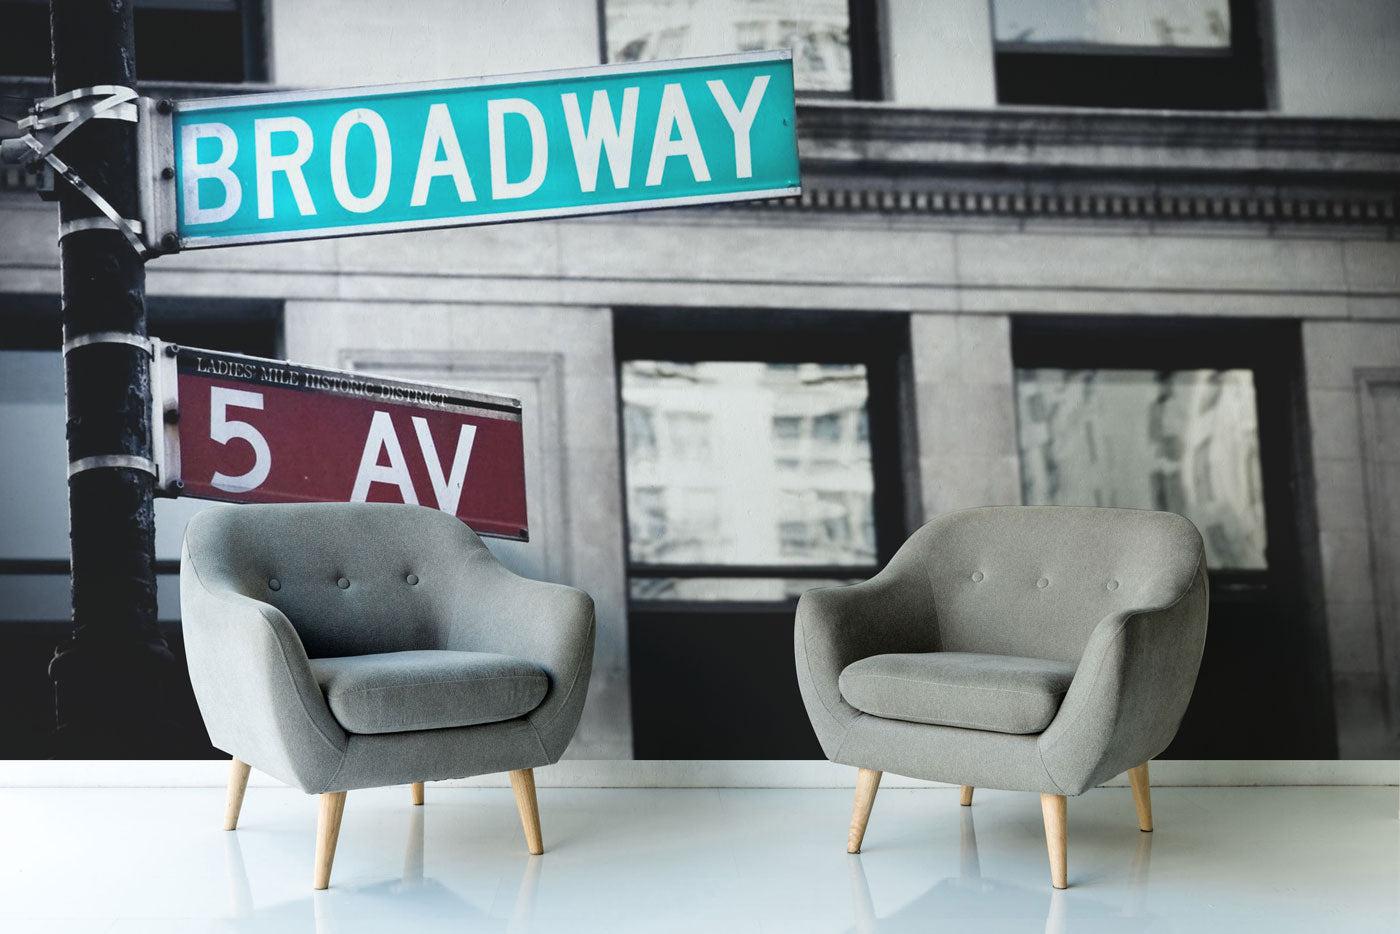 Broadway sign in New York City Wall Mural-Wall Mural-Eazywallz